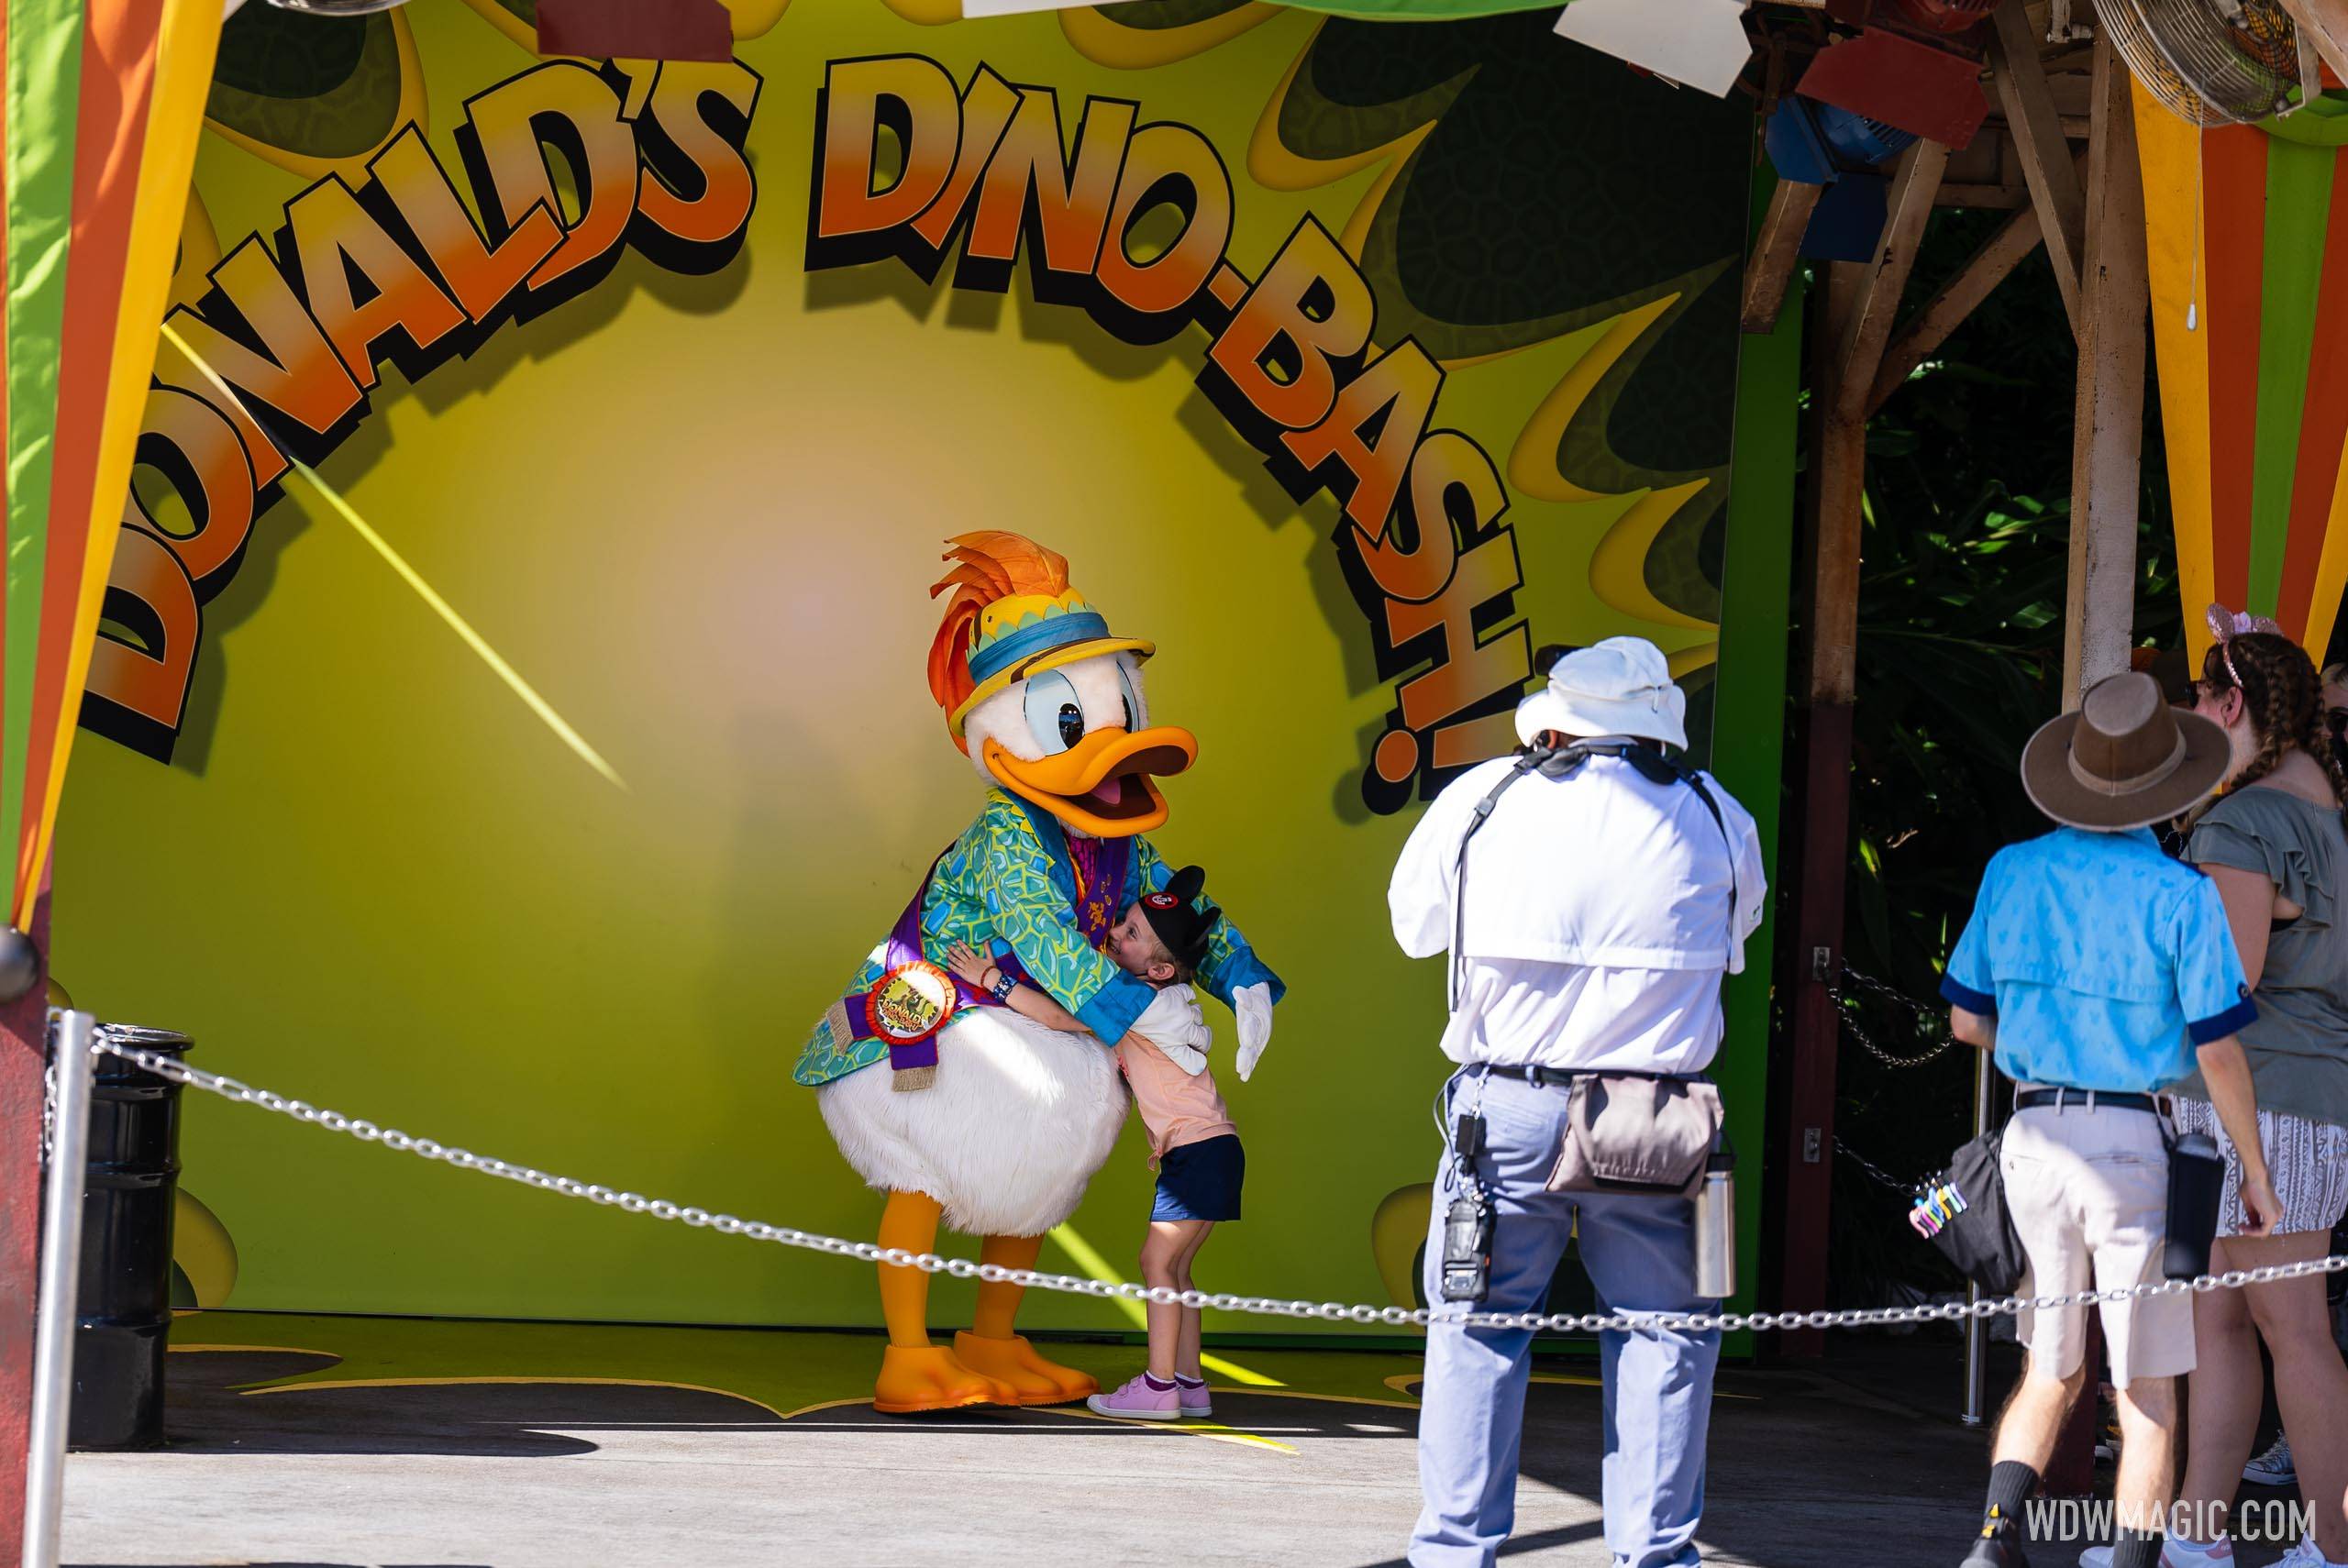 Donald Duck at Donald's Dino Bash